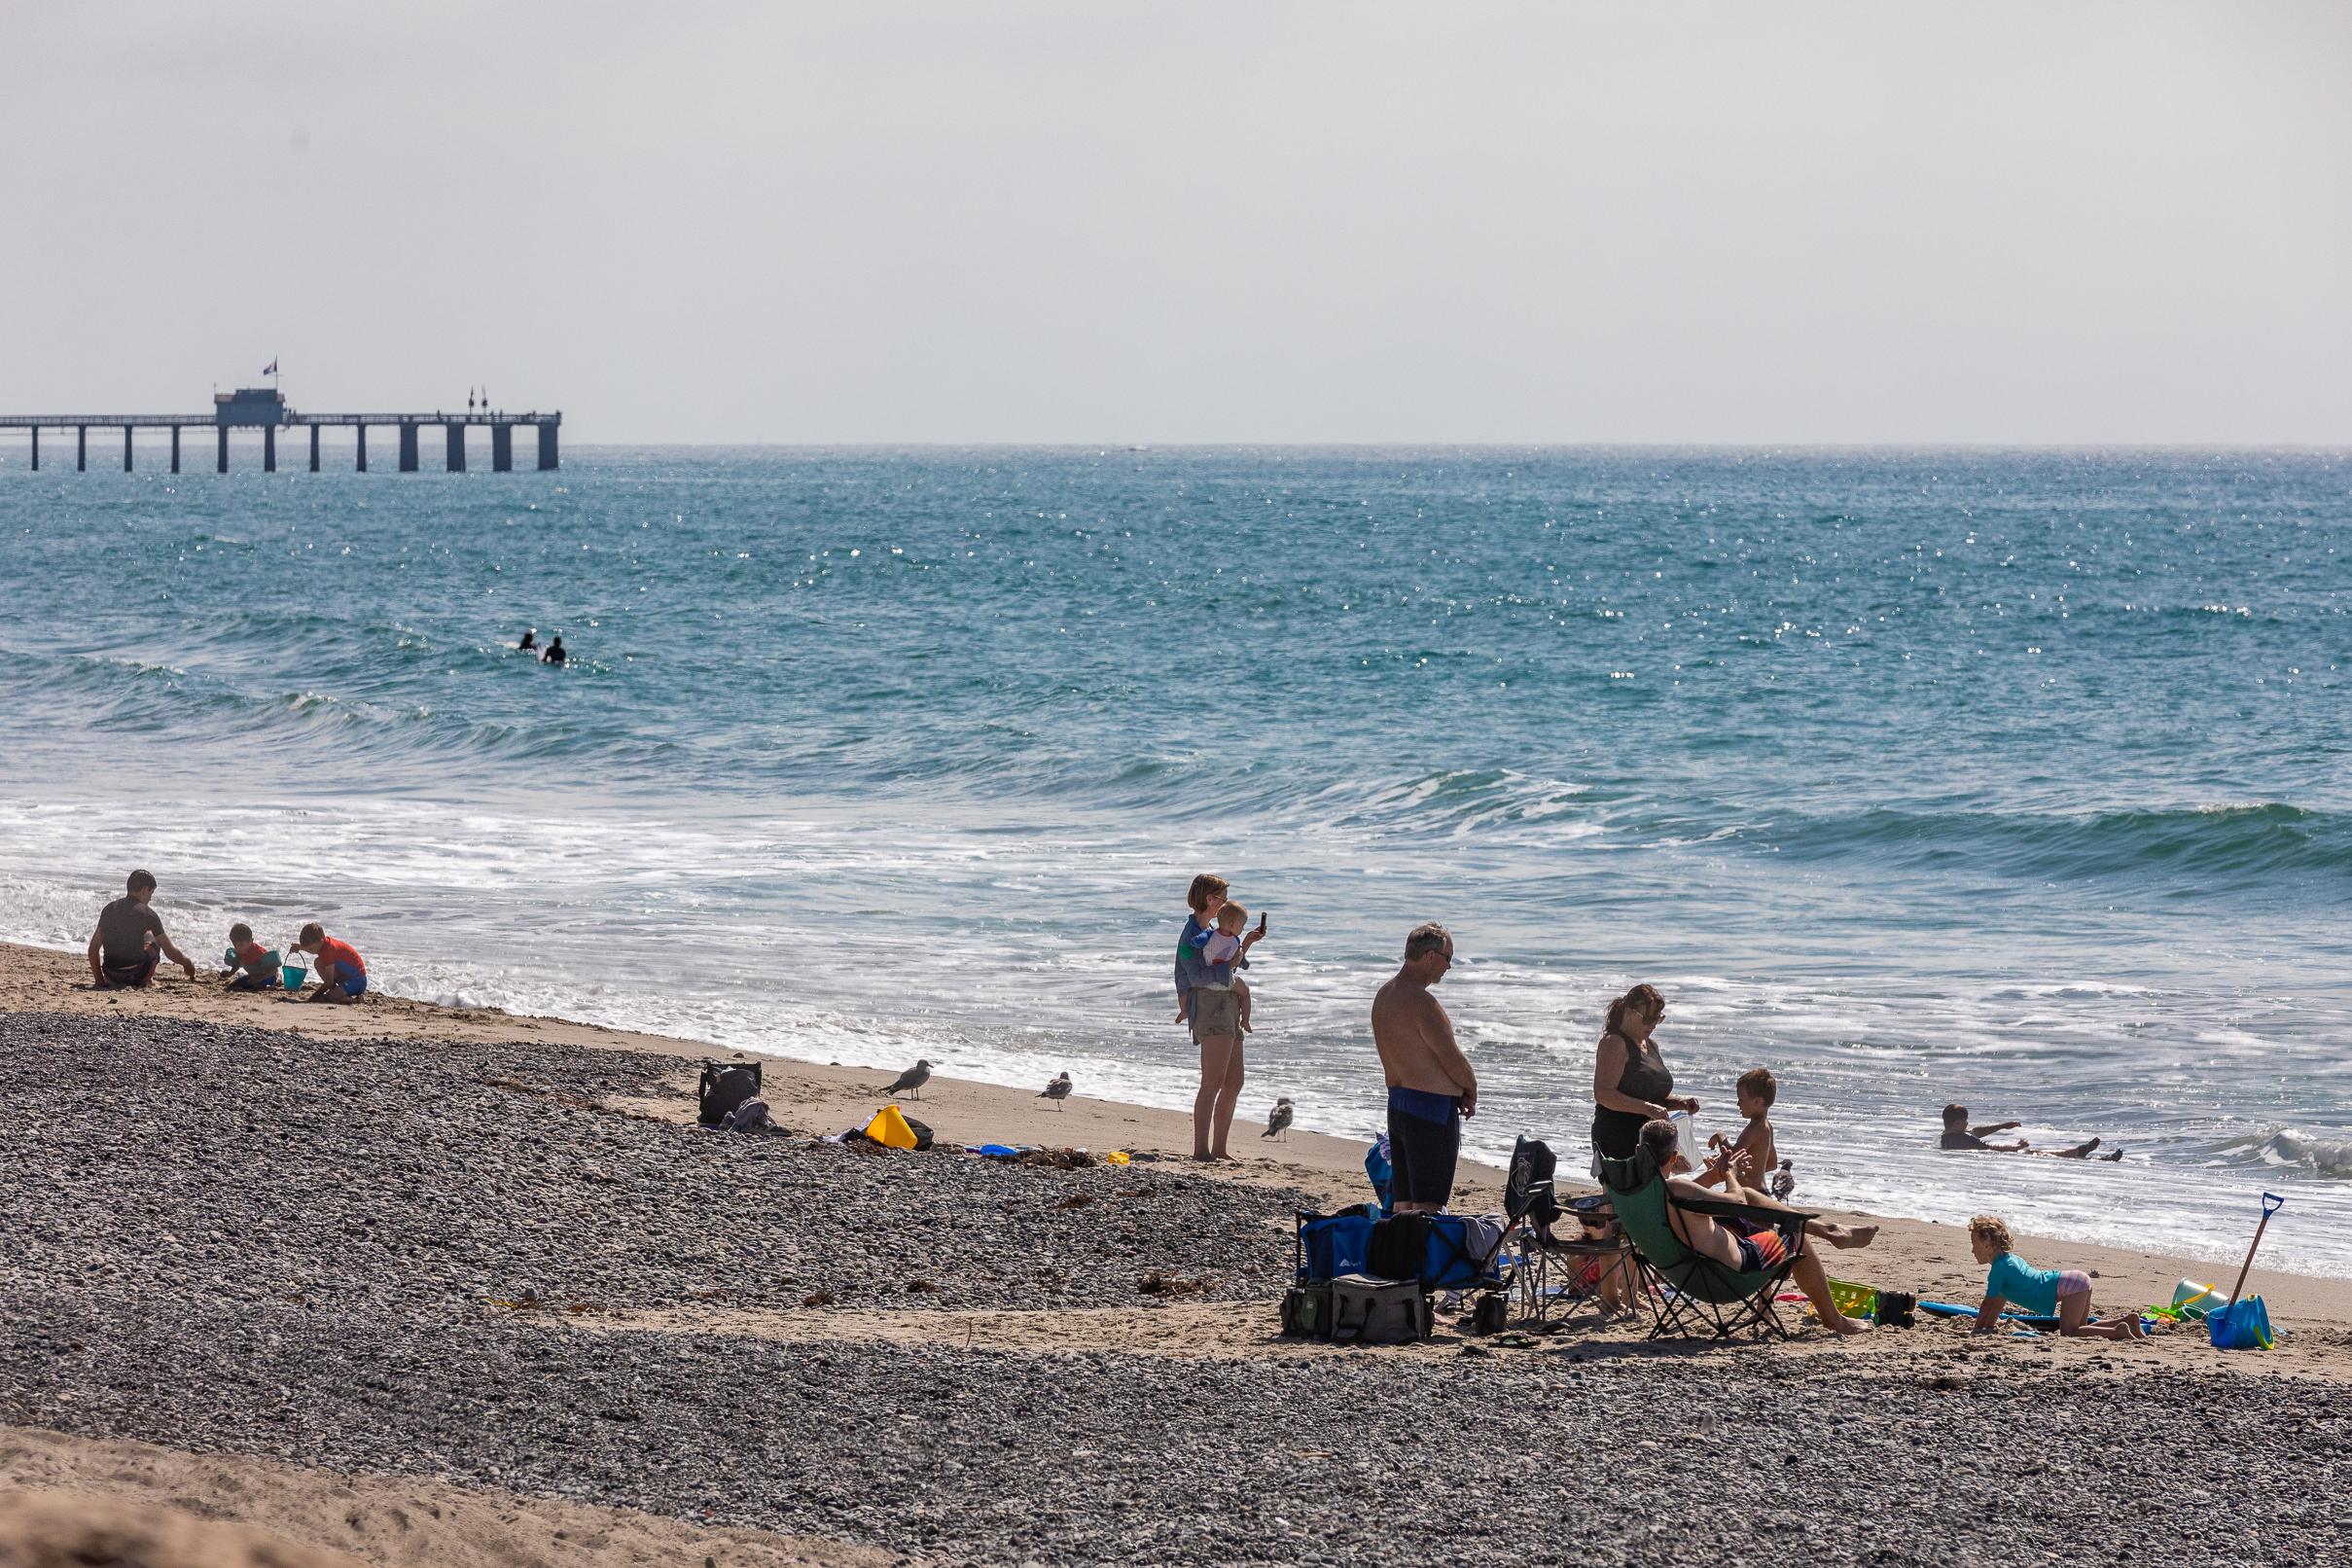 Wastewater Sewage Rates Will Rise for San Clemente Residents